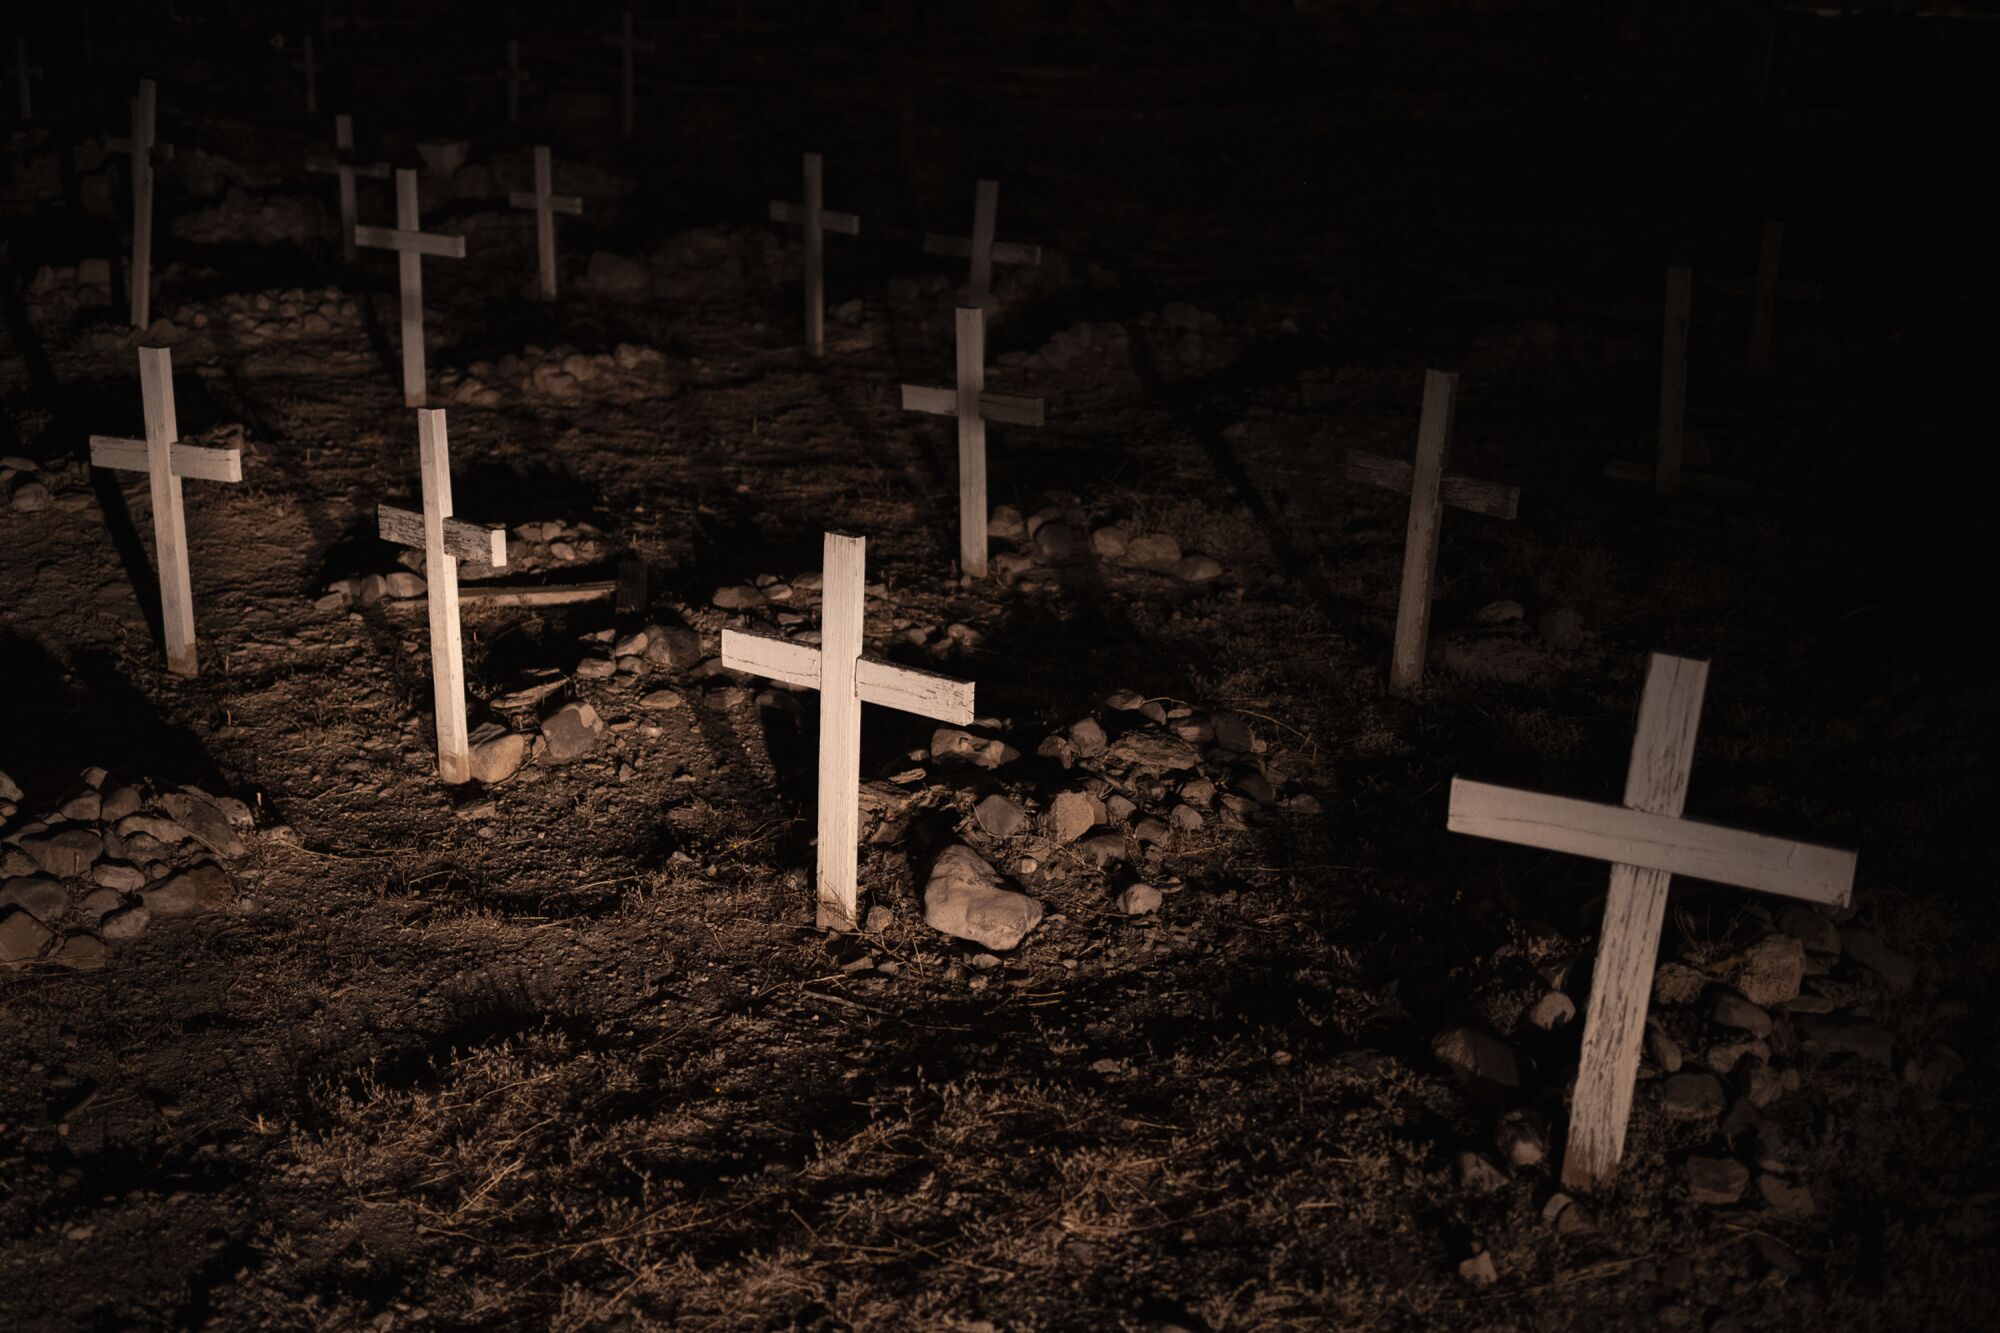 Unmarked graves on U.S. soil, half a mile from the Mexican border.